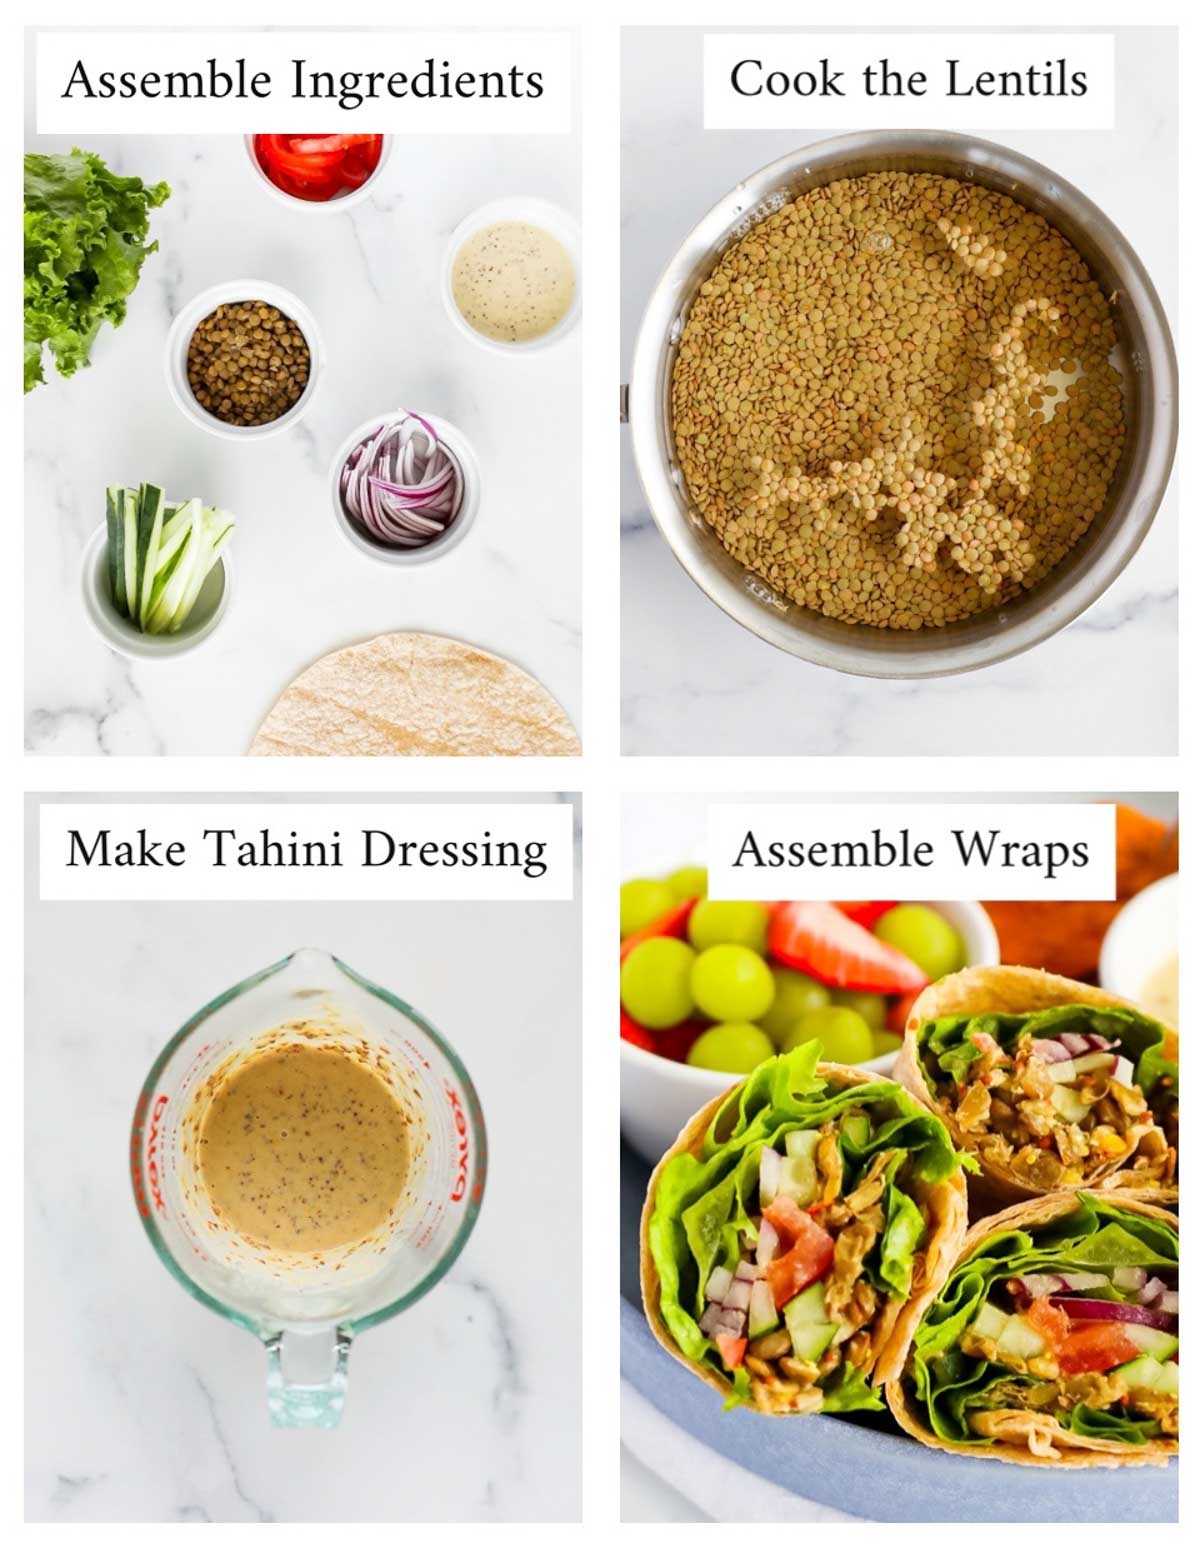 Four pictures with labels including: assemble ingredients, cook the lentils, make tahini dressing, assemble wraps